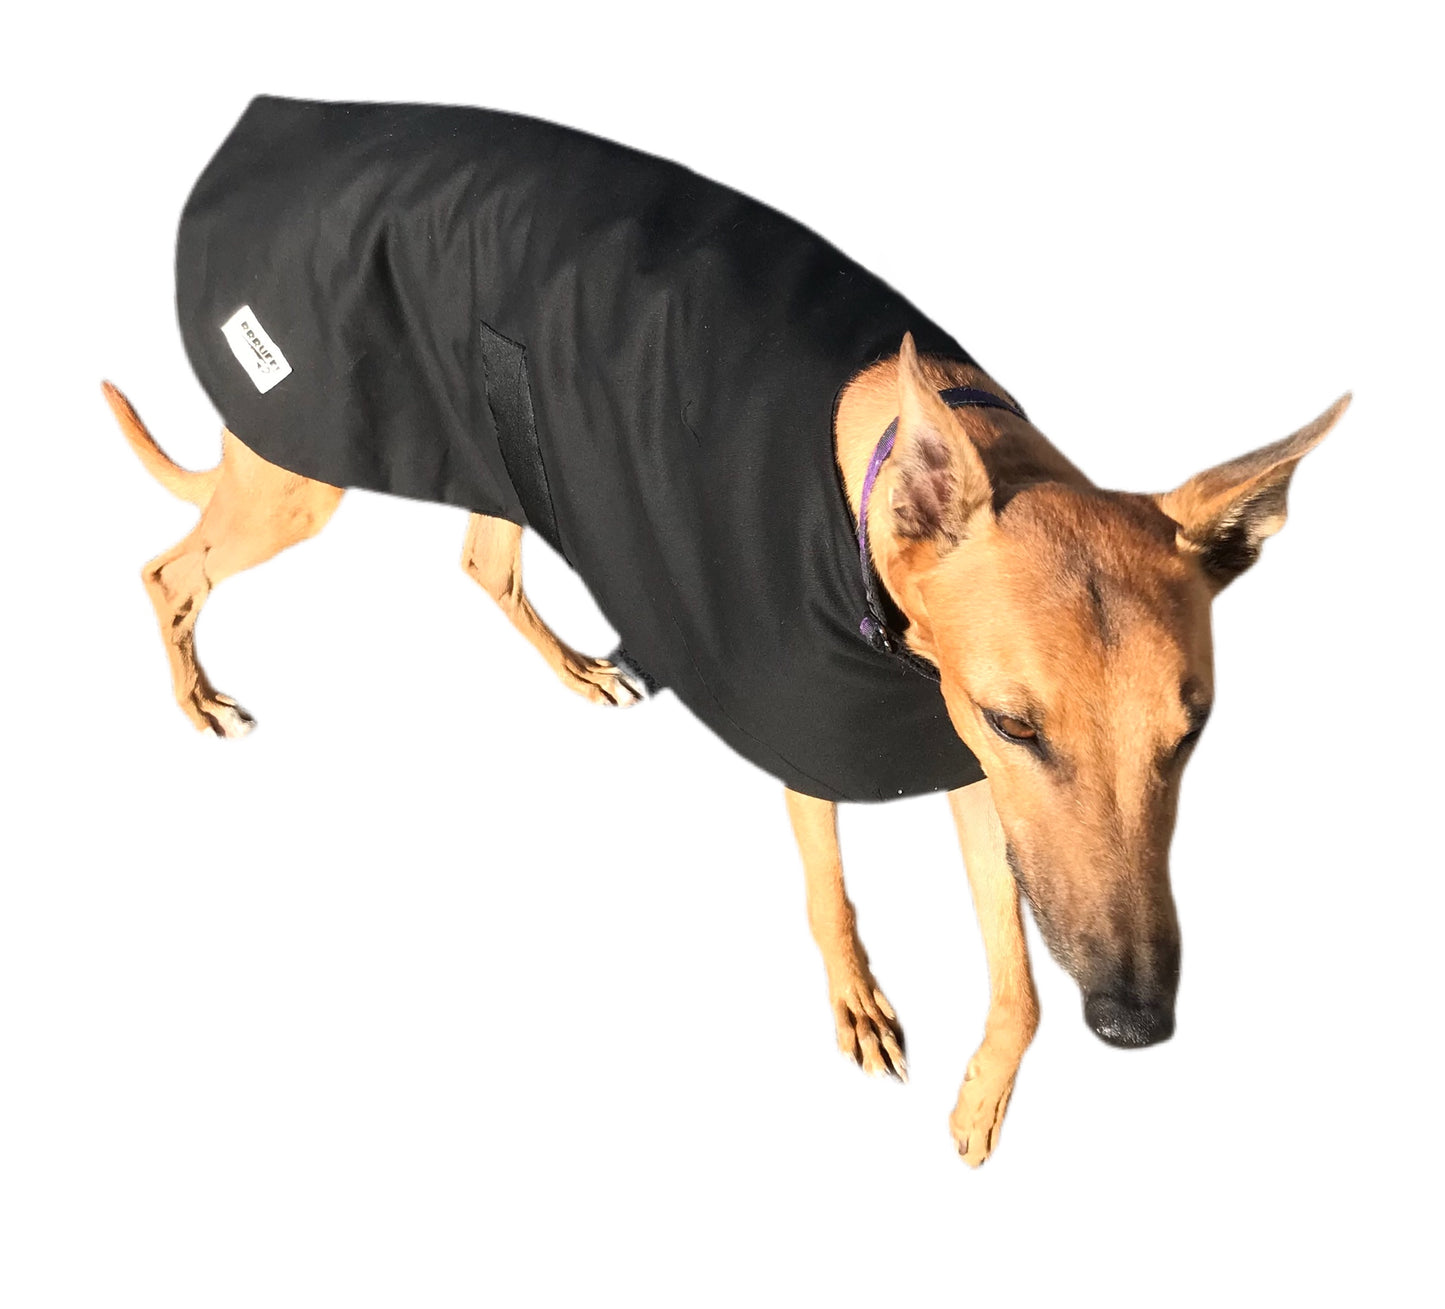 Spring wear classic style Greyhound ‘basic black’ coat in cotton & thick fleece washable